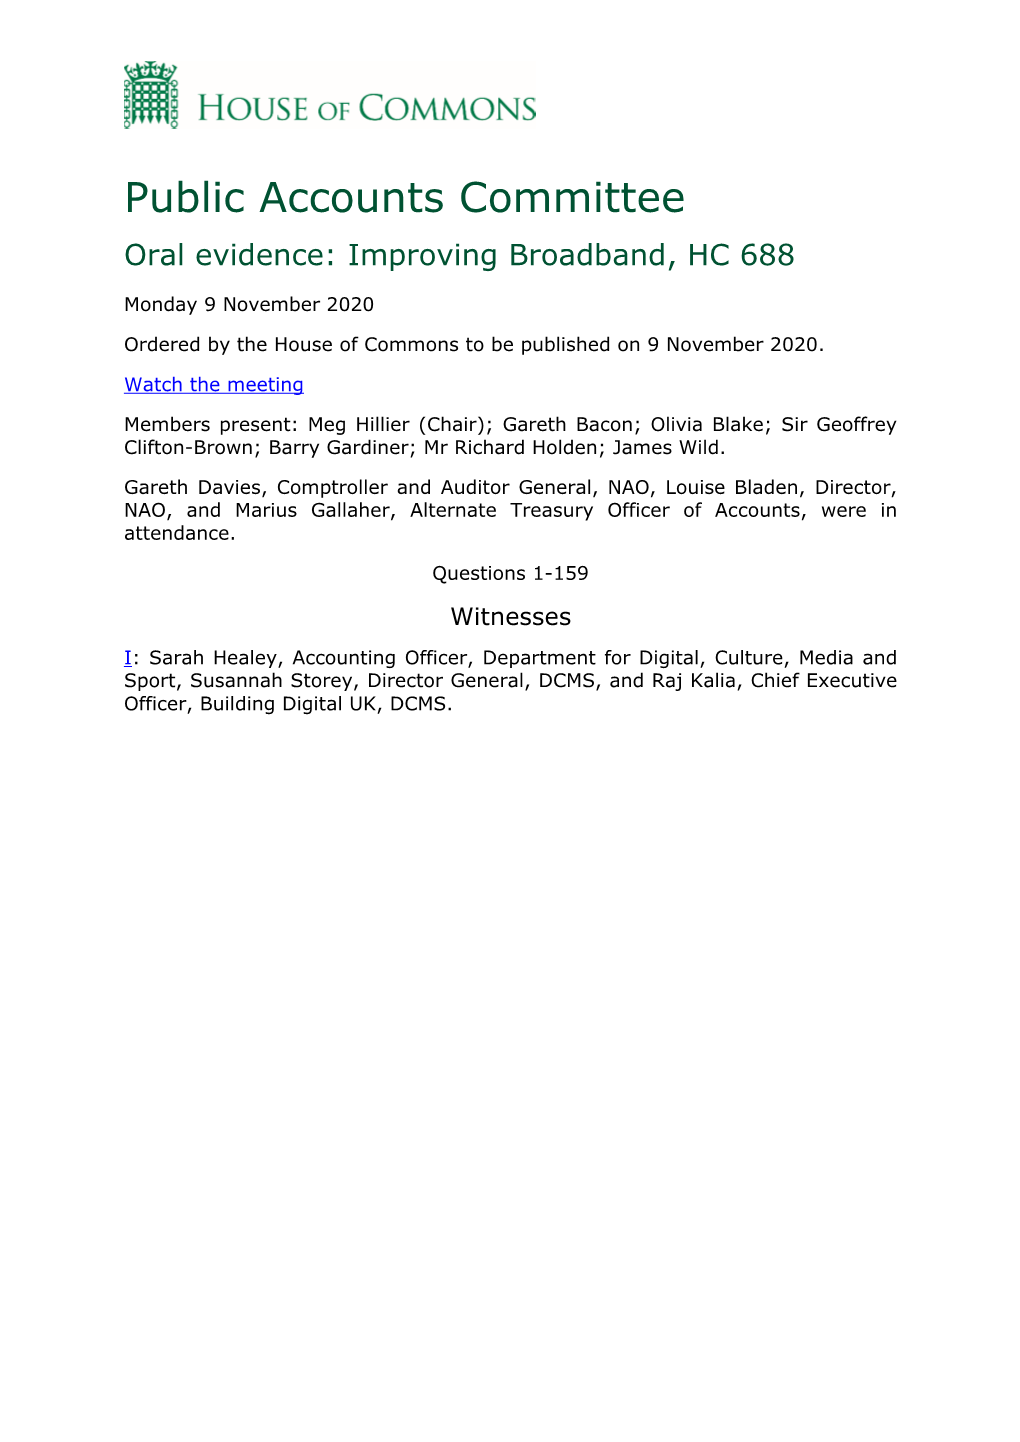 Public Accounts Committee Oral Evidence: Improving Broadband, HC 688